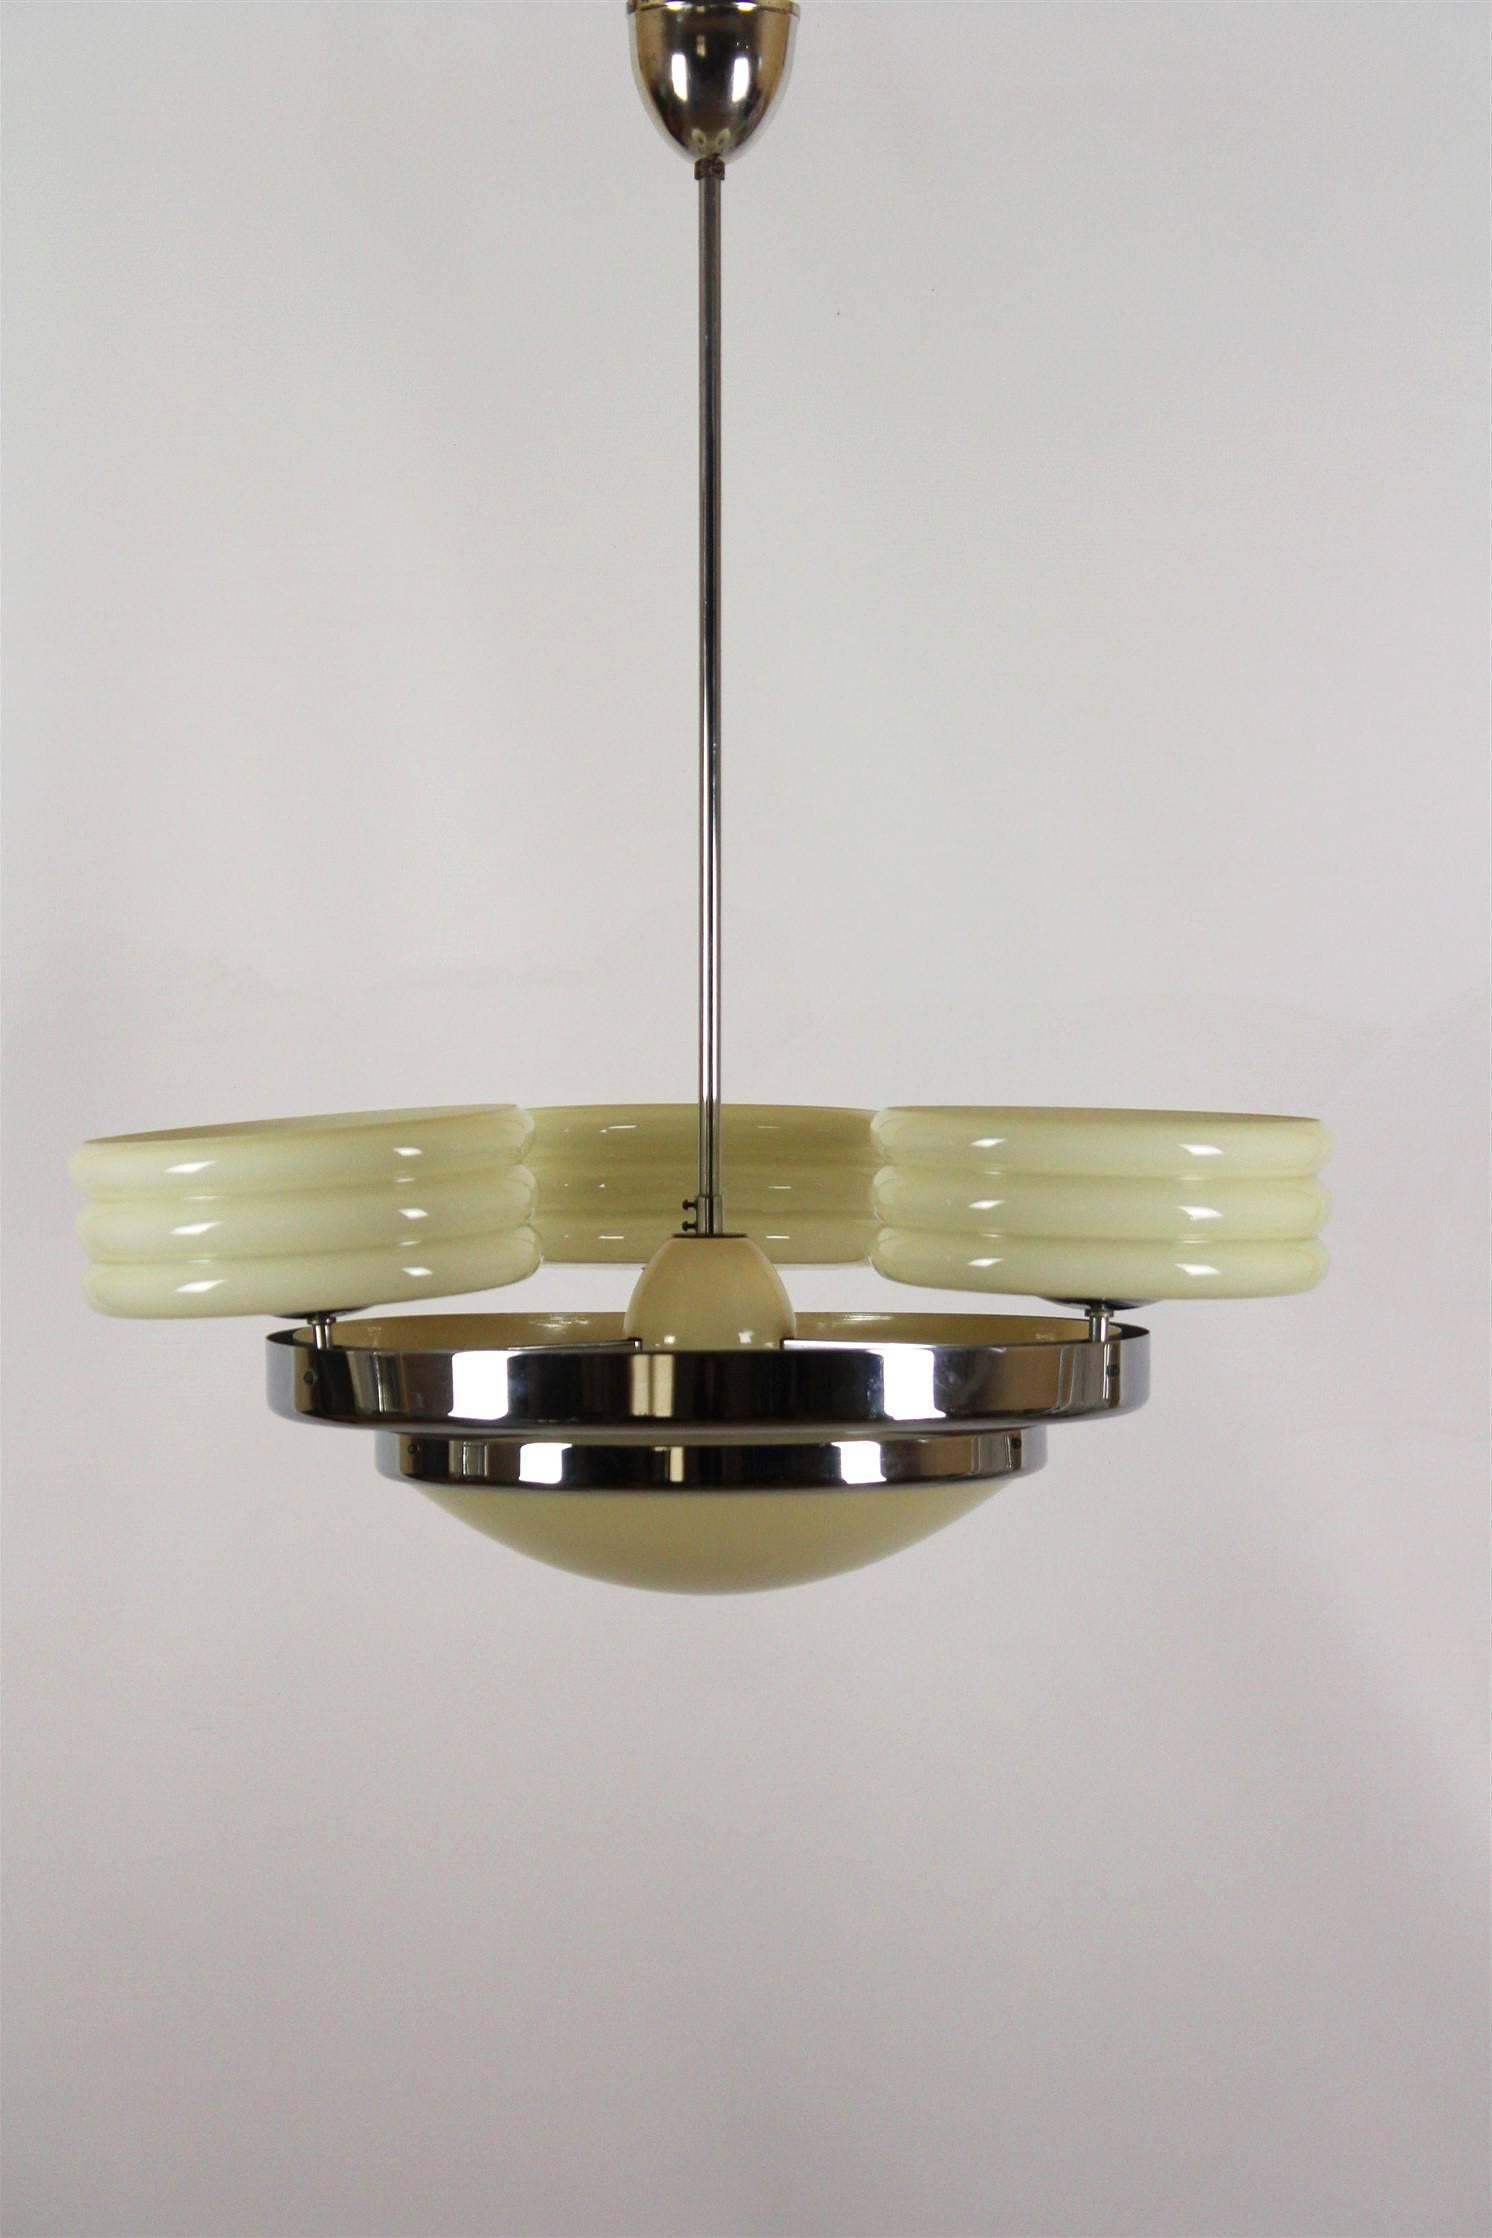 This Art Deco chandelier was manufactured by Zukov in the 1930s. The light is made of chrome-plated steel and opaline glass and is in original condition.